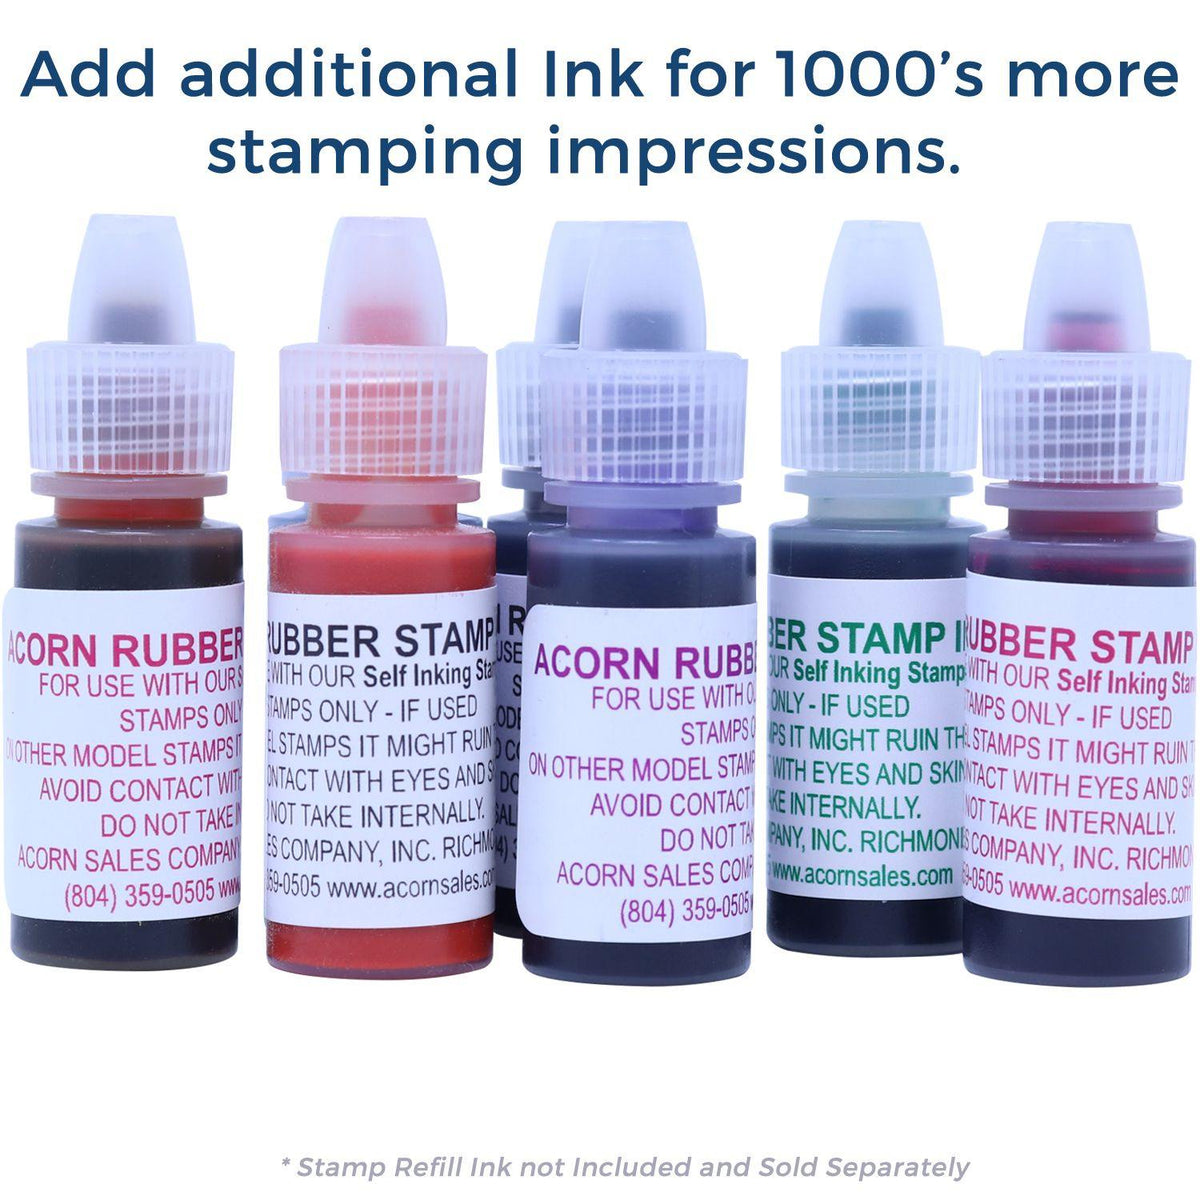 Refill Inks for Large Pre-Inked Void with Strikelines Stamp Available